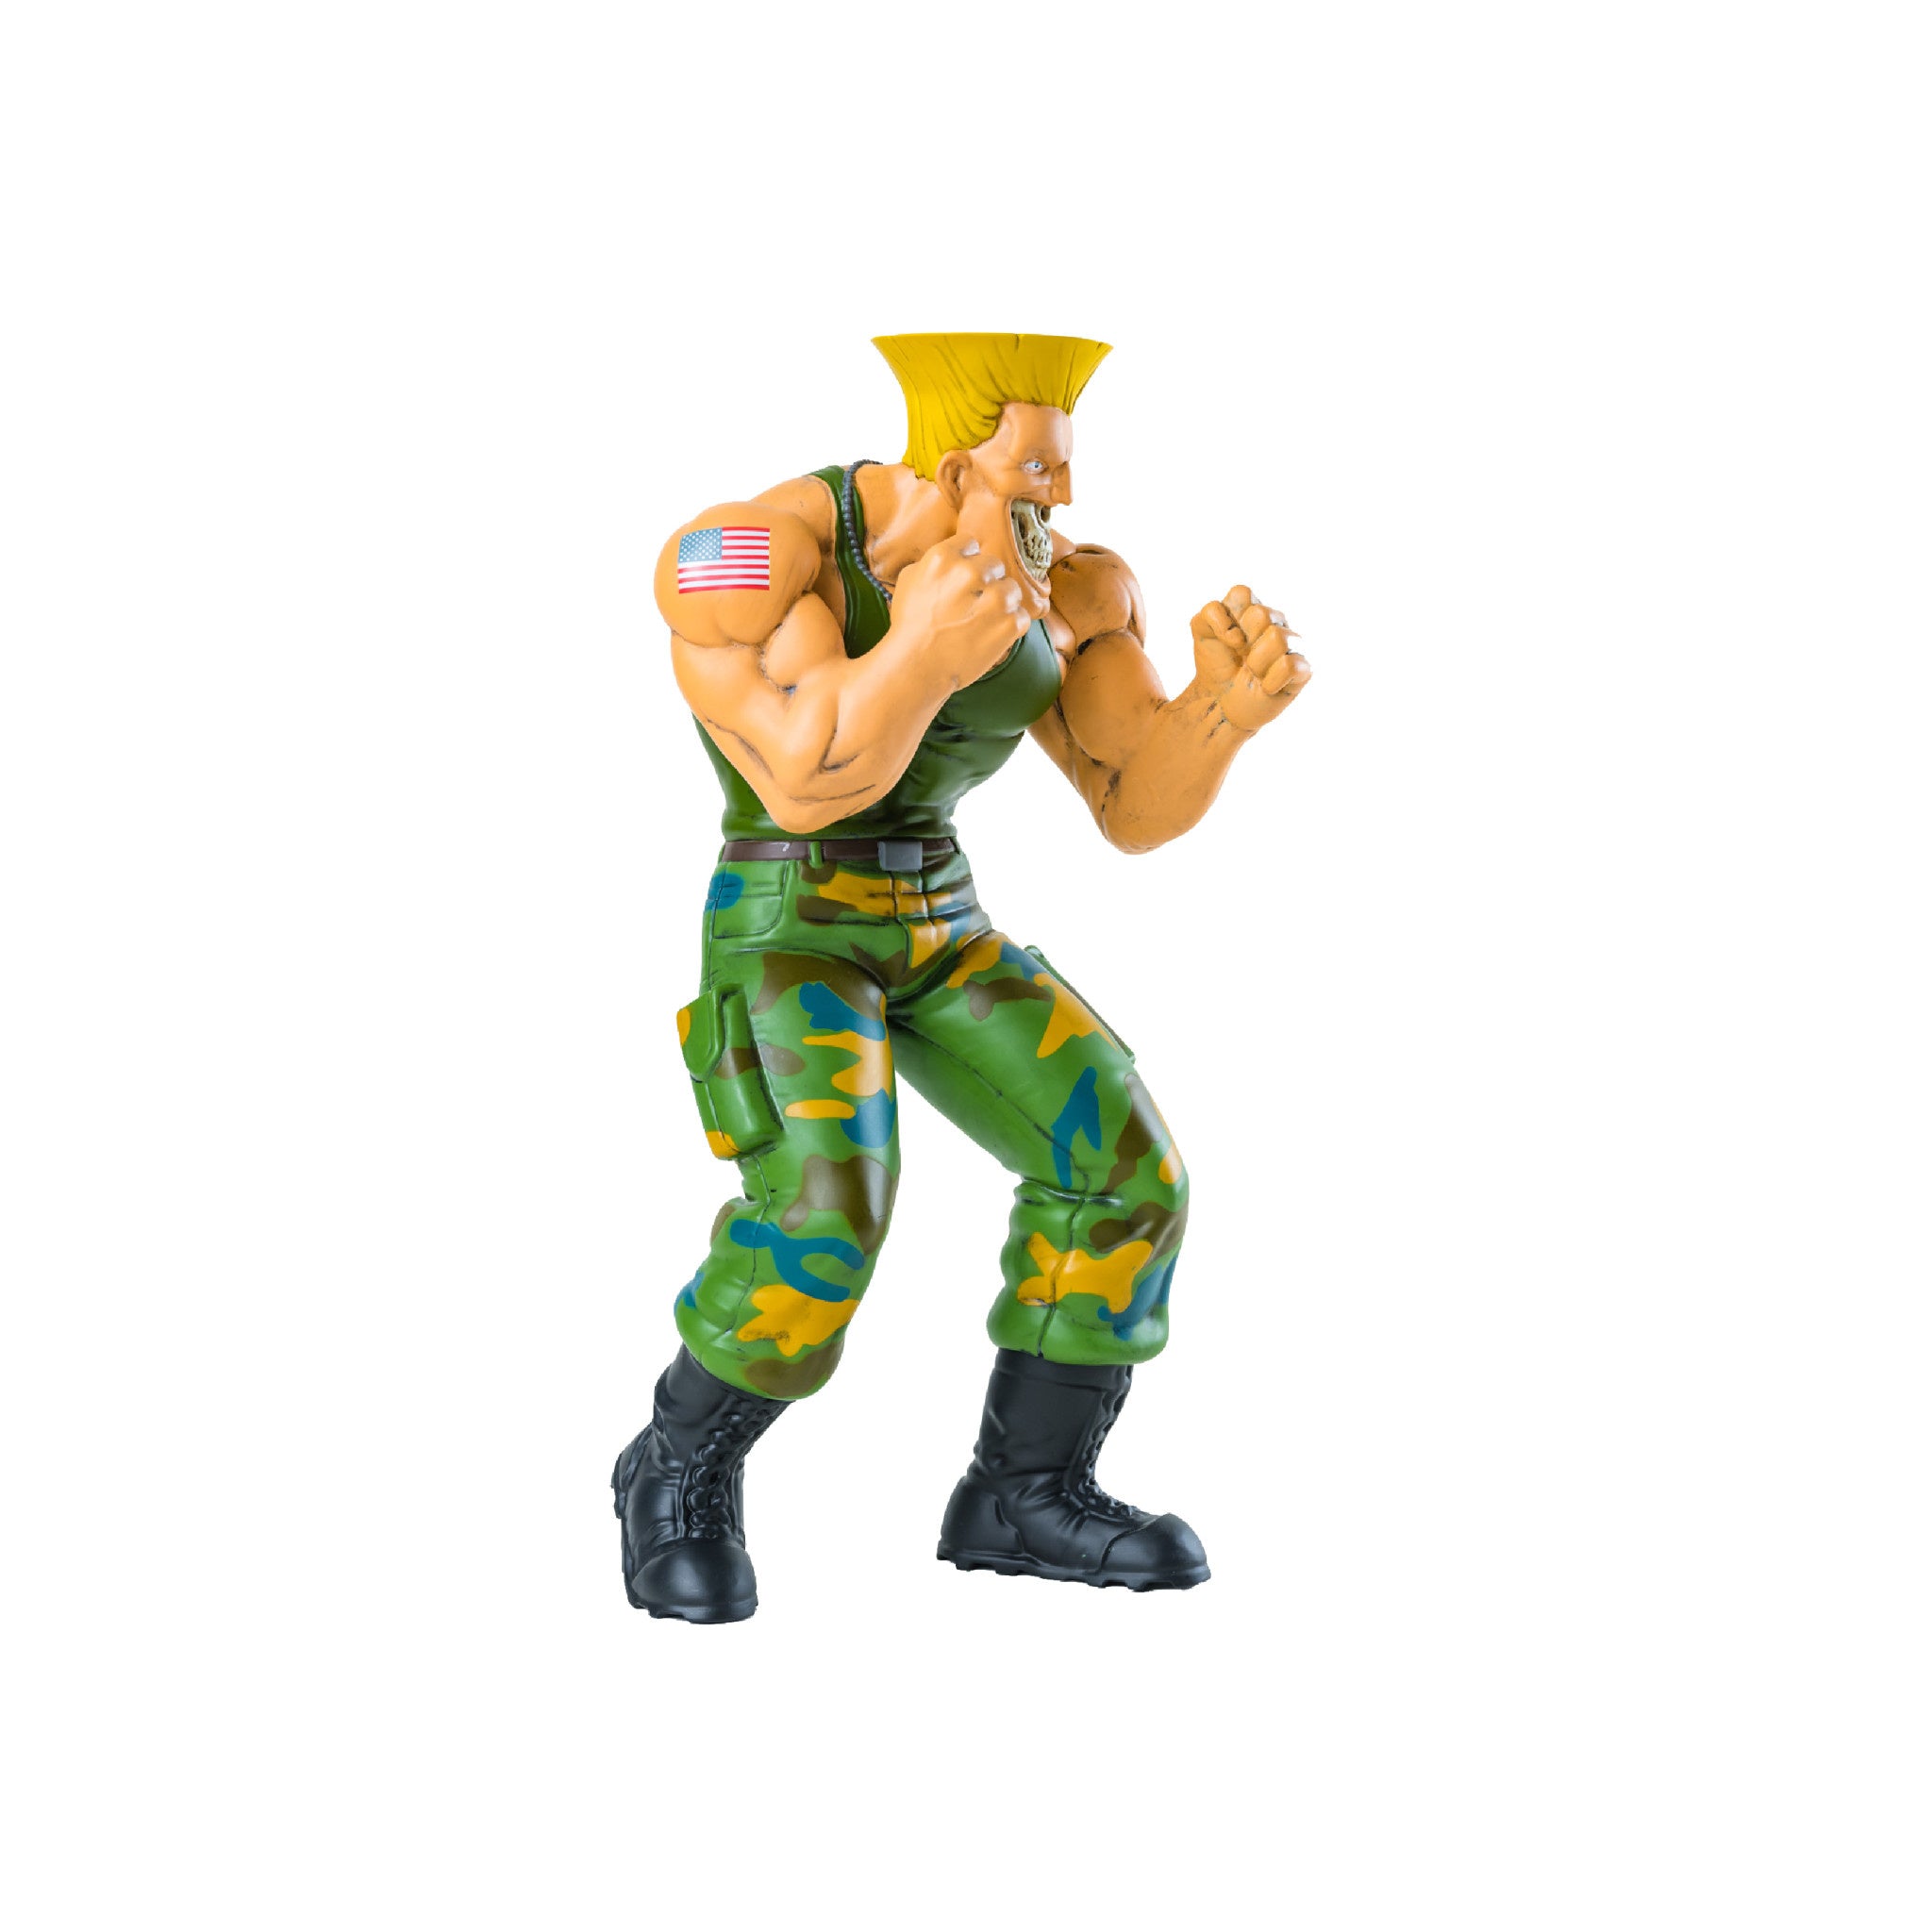 Ron English Street Fighter Guile Figure - Wynwood Walls Shop